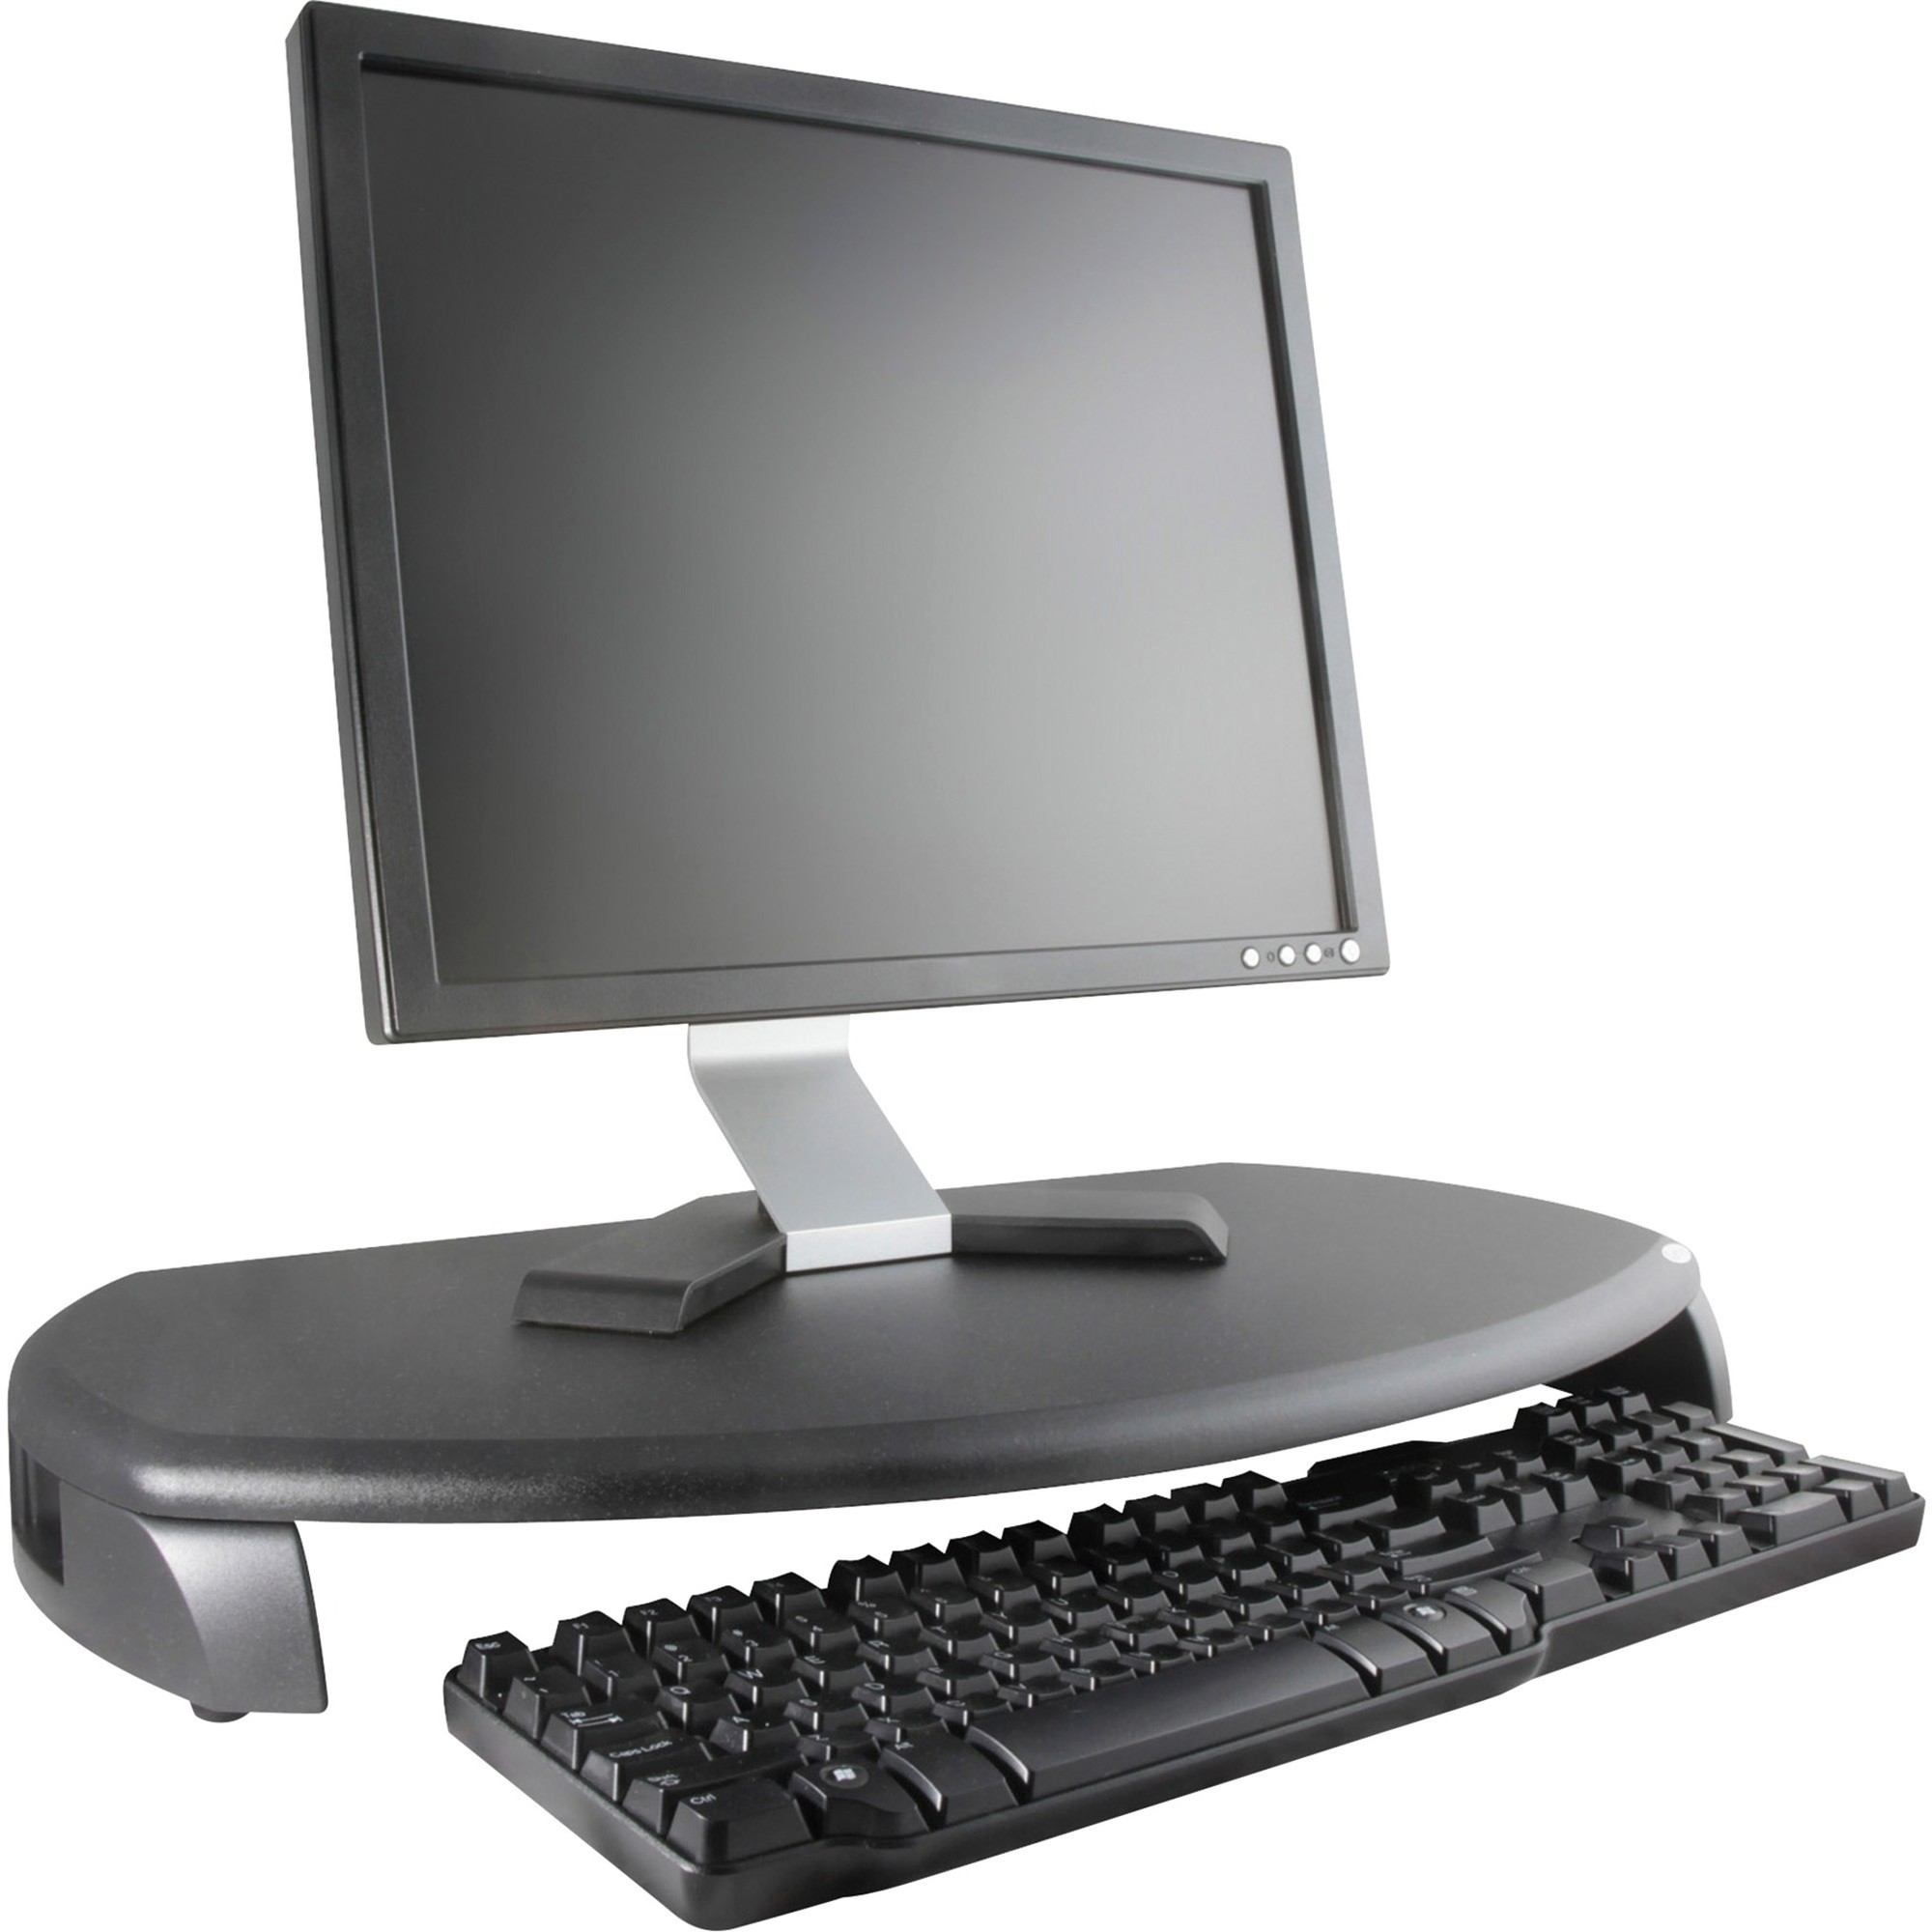 CRT/LCD Stand with Keyboard Storage, 23 x 13 1/4 x 3, Black